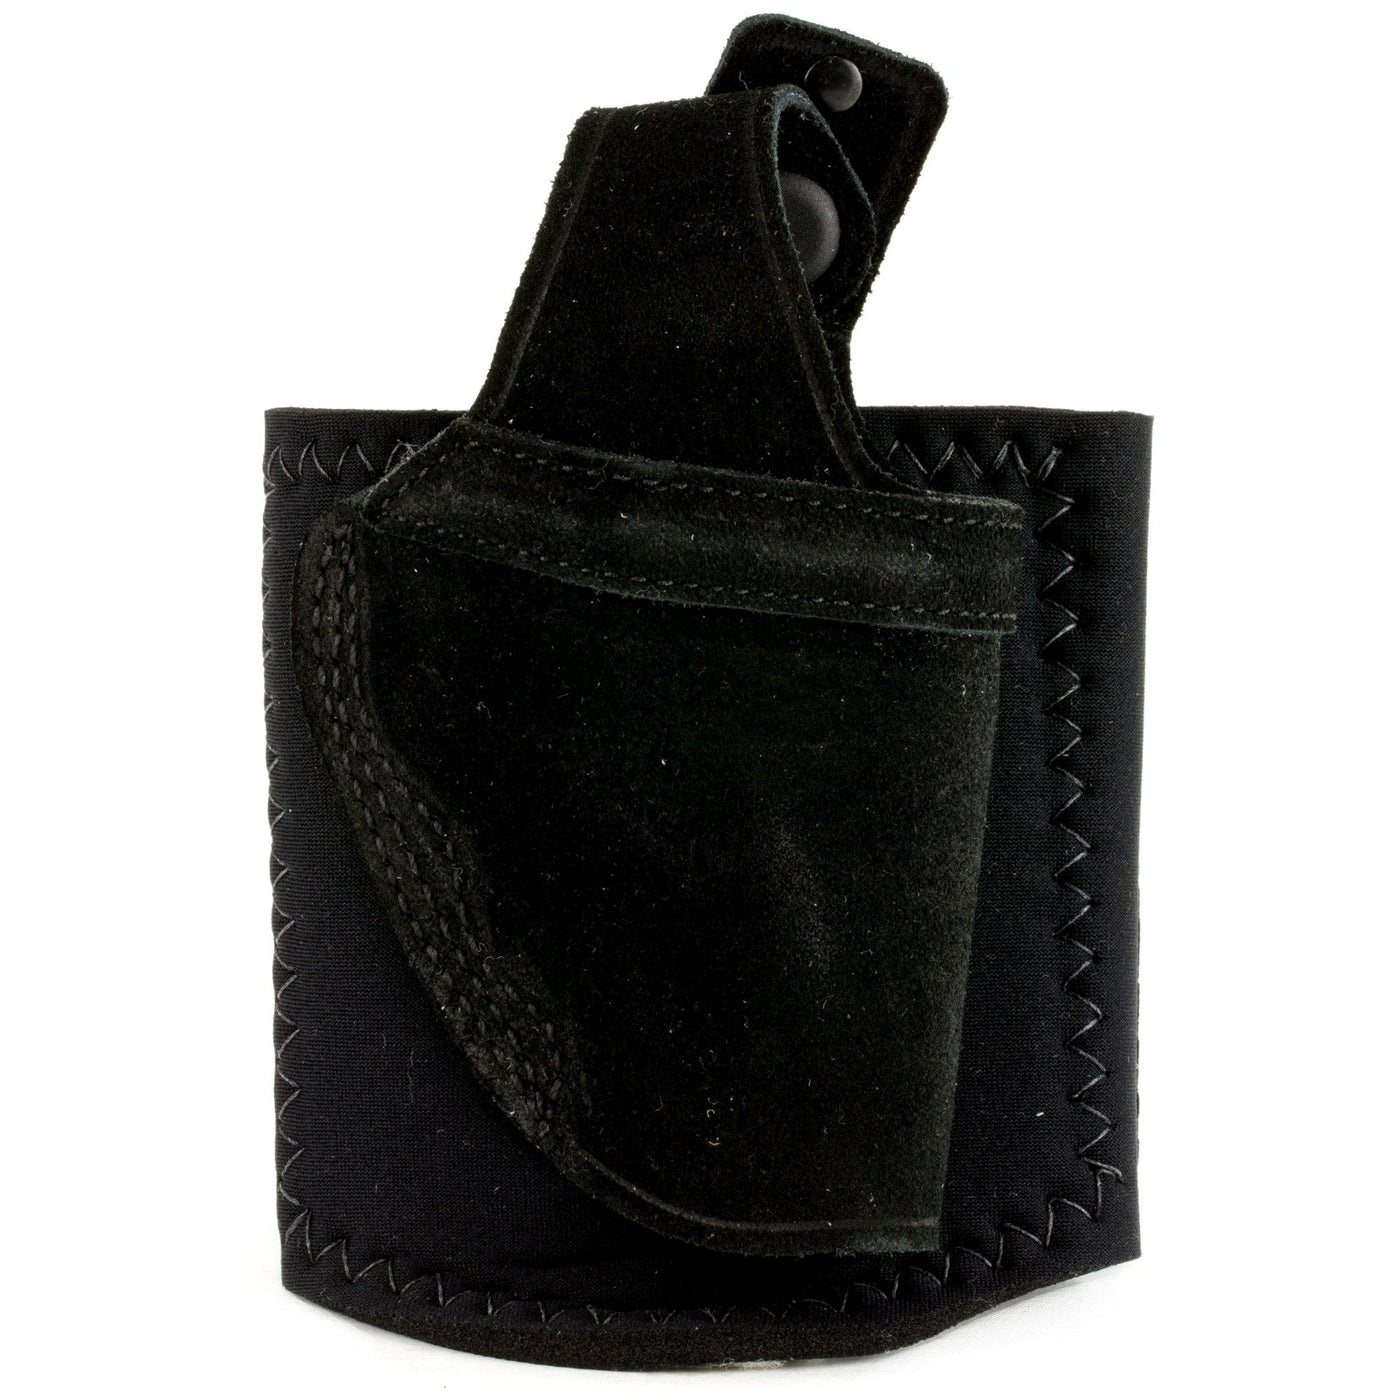 Galco Galco Ankle Lite Holster Rh - Leather Ruger Lcr 2" Black Holsters